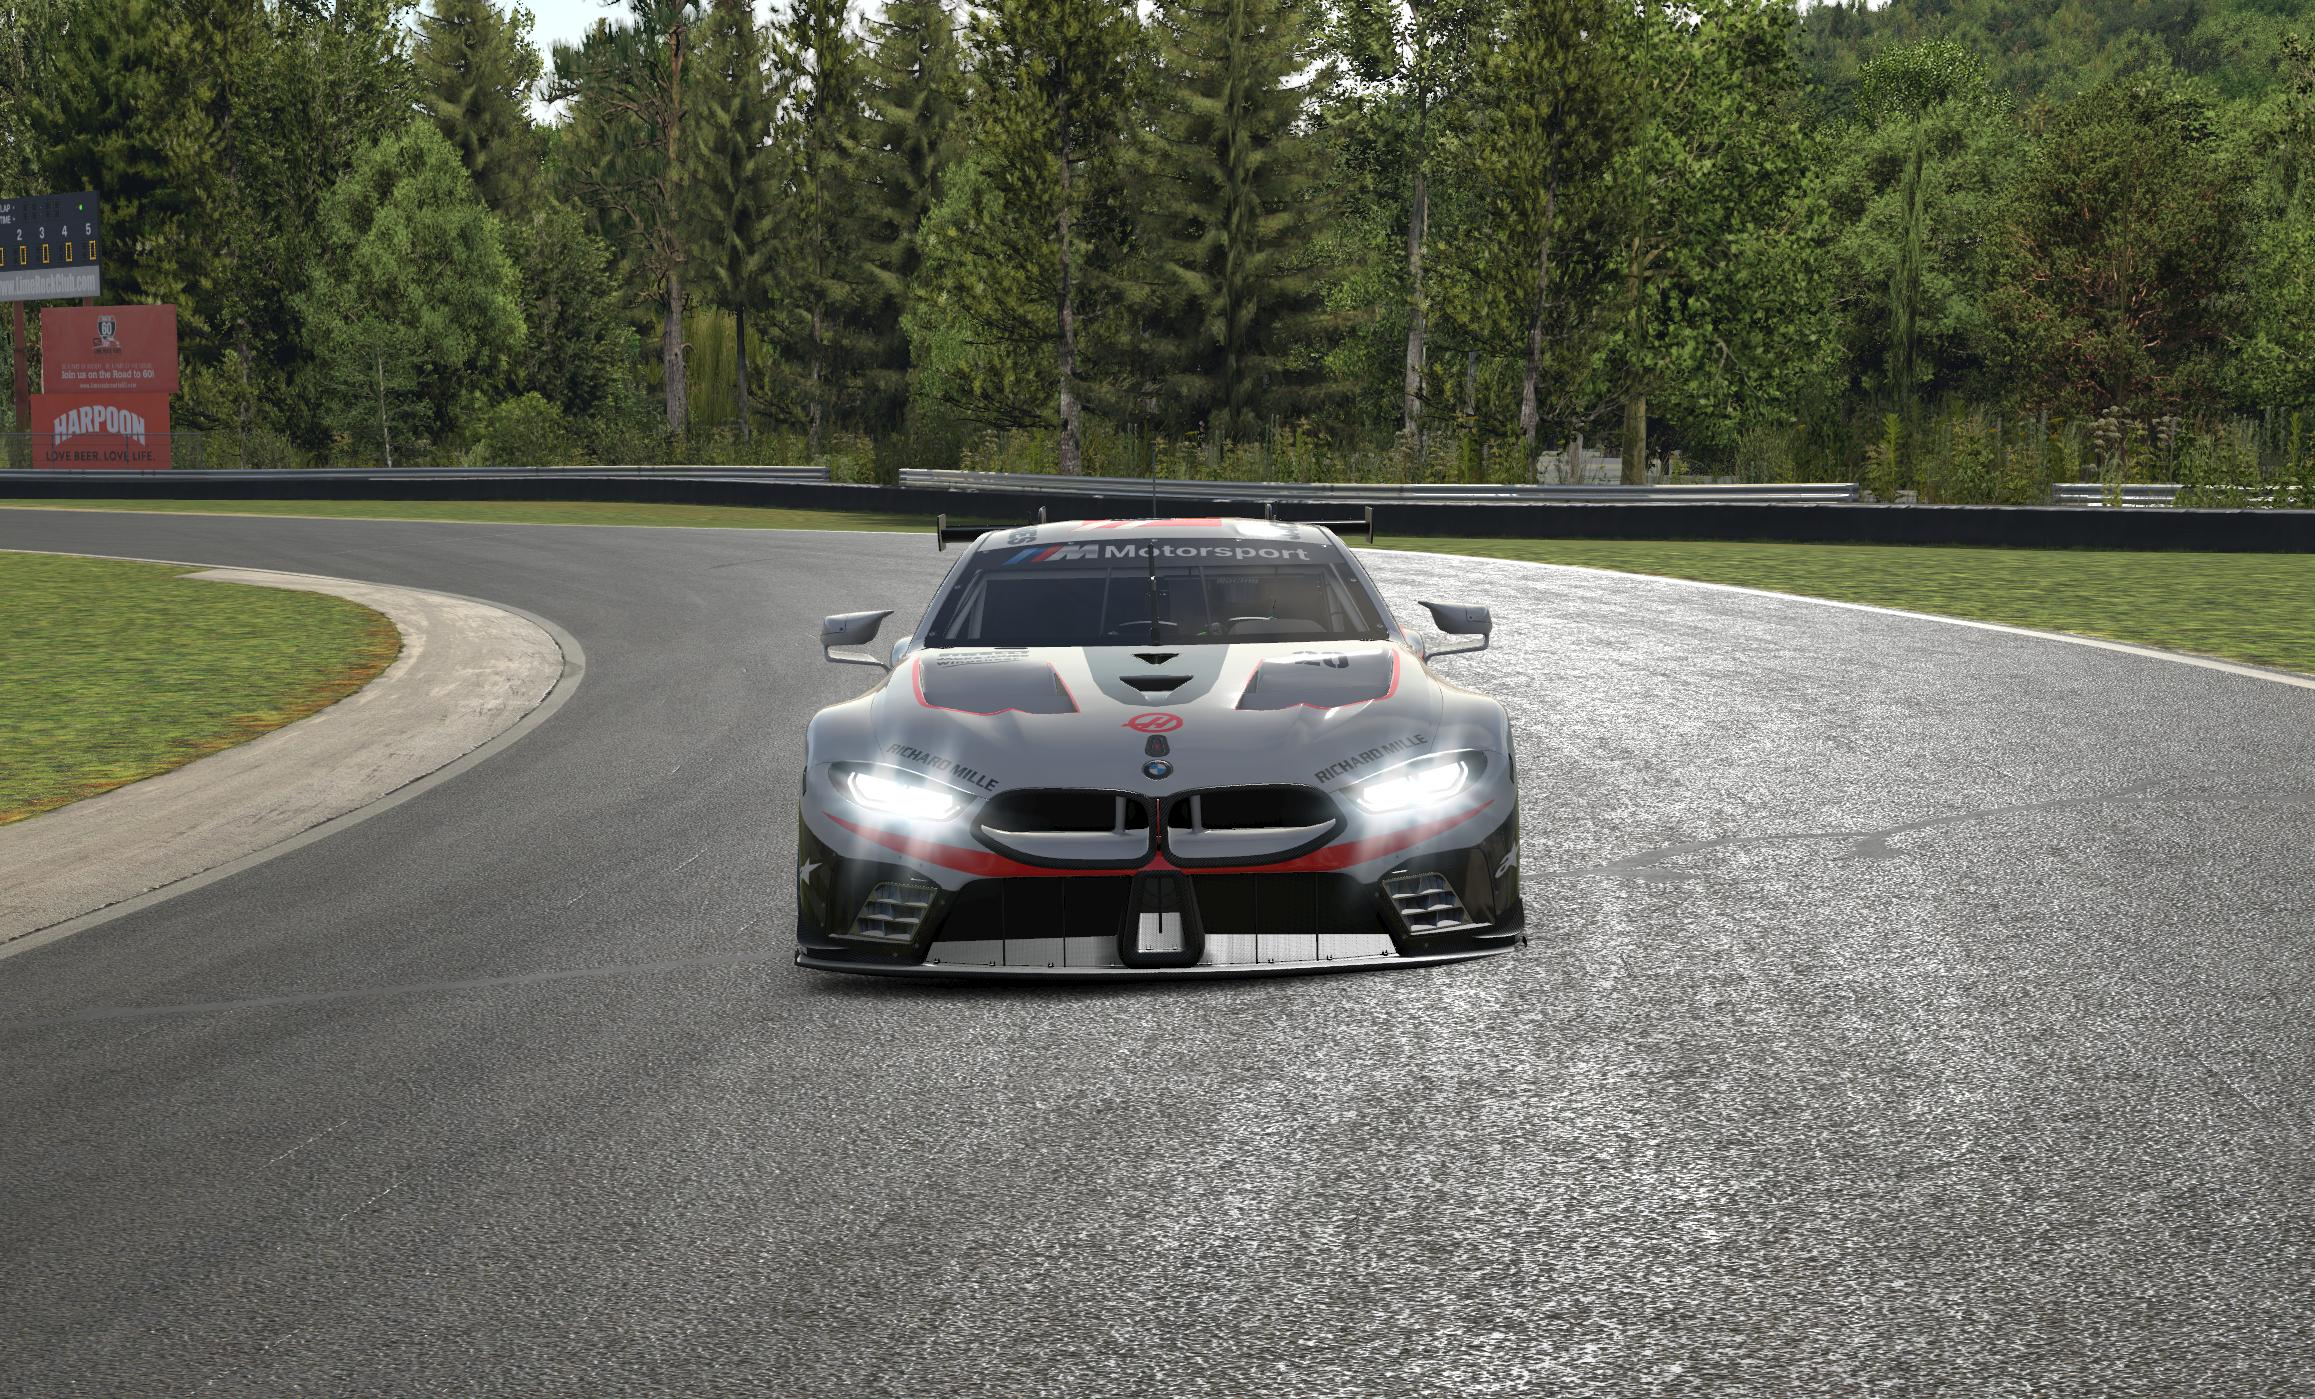 Preview of Haas F1 Kevin Magnussen Livery - BMW M8 GTE by Gino Kelleners